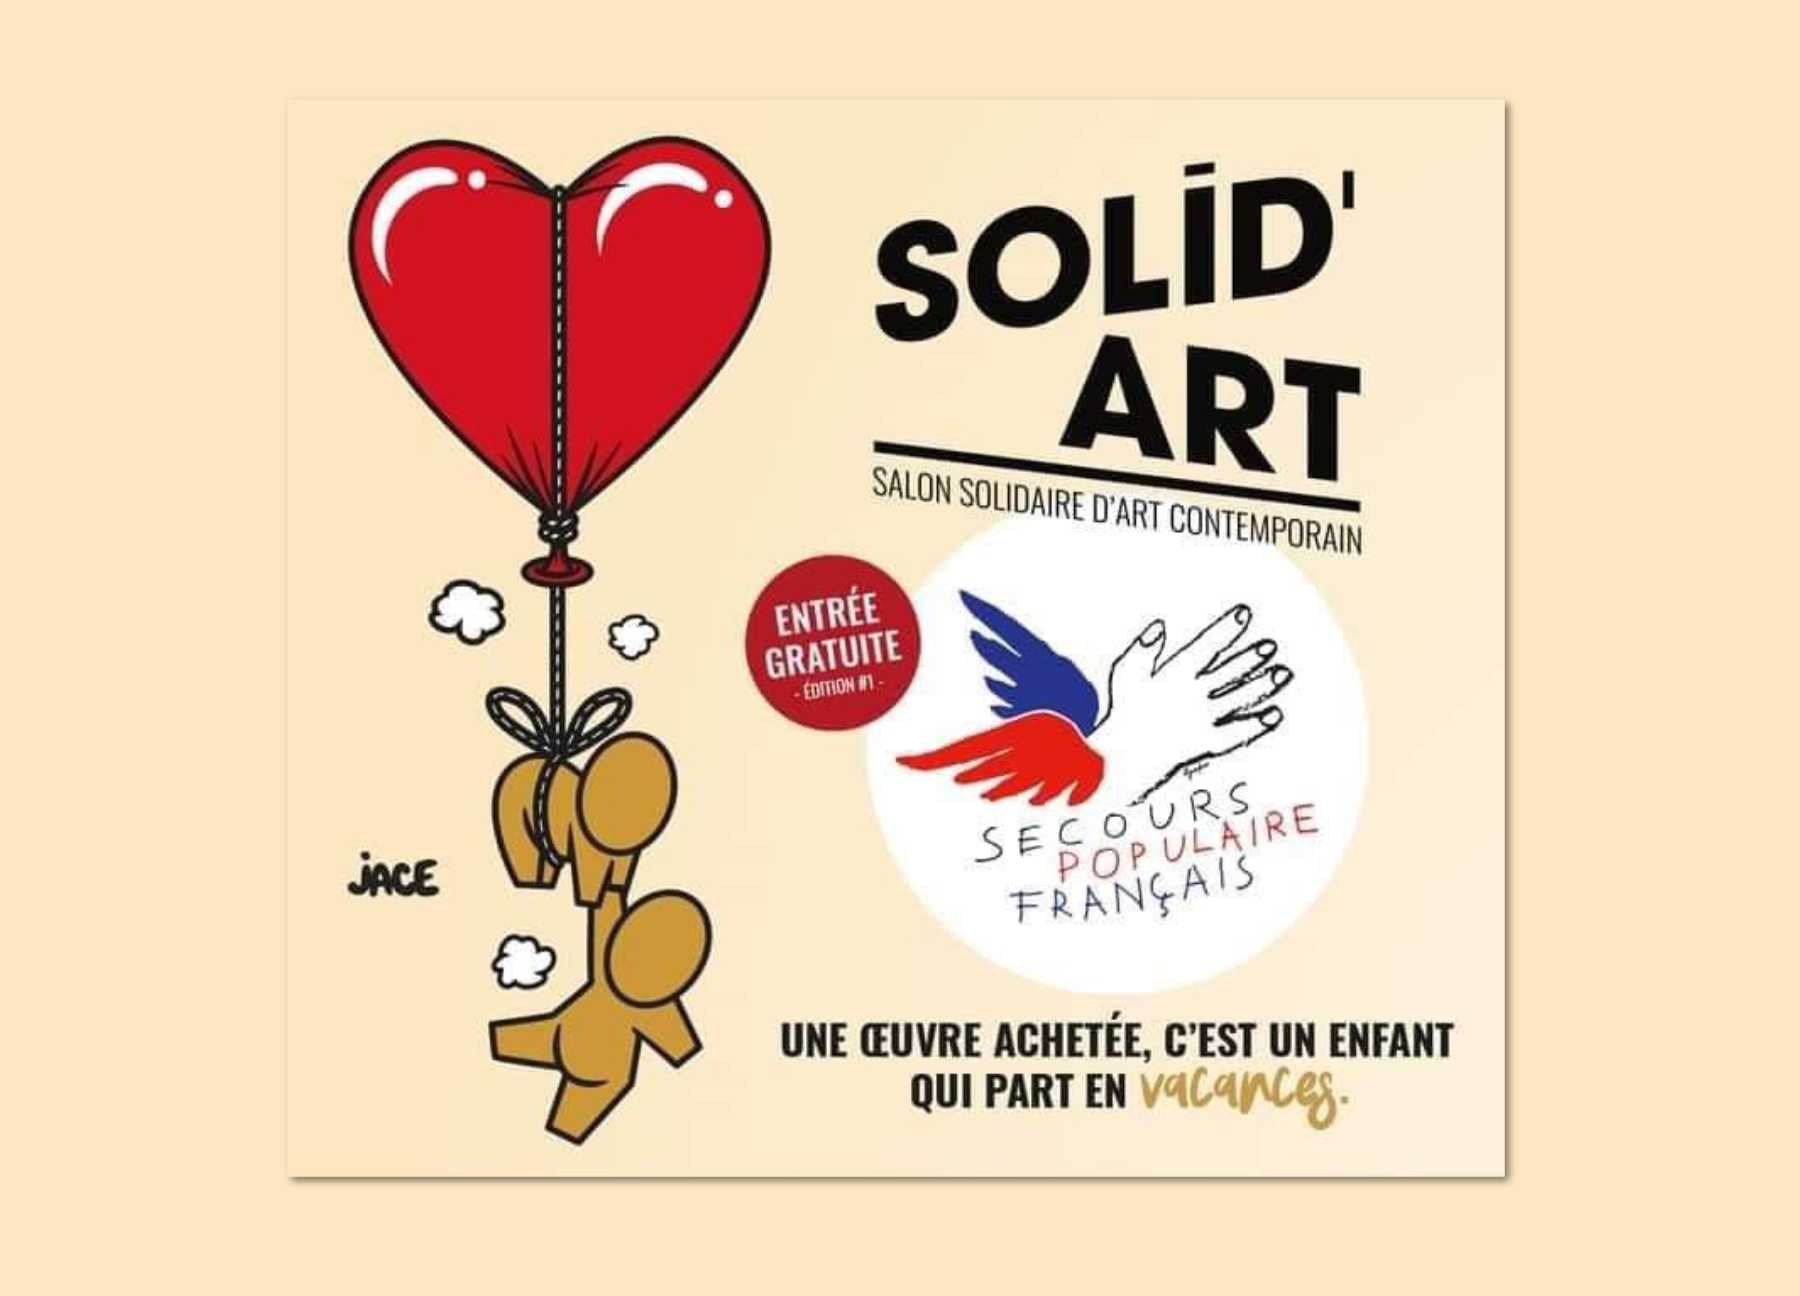 Solid'Art, Paris: Art In Action Acquire a piece of art at Secours Populaire's contemporary art fair and a child gets a holiday